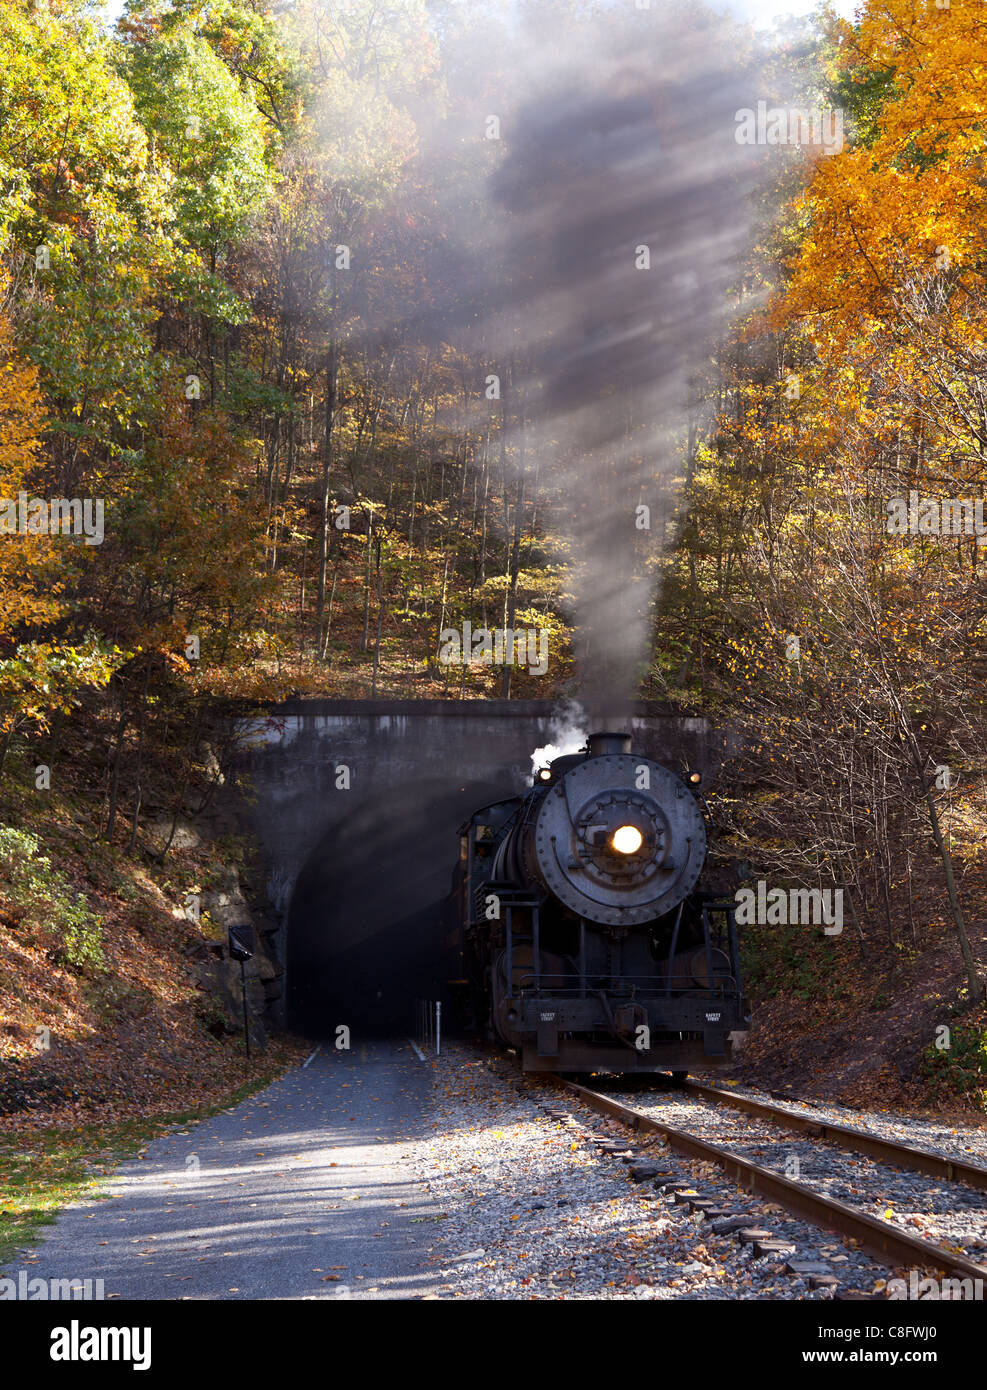 Old steam train pulling out of a tunnel belching steam and smoke Stock Photo